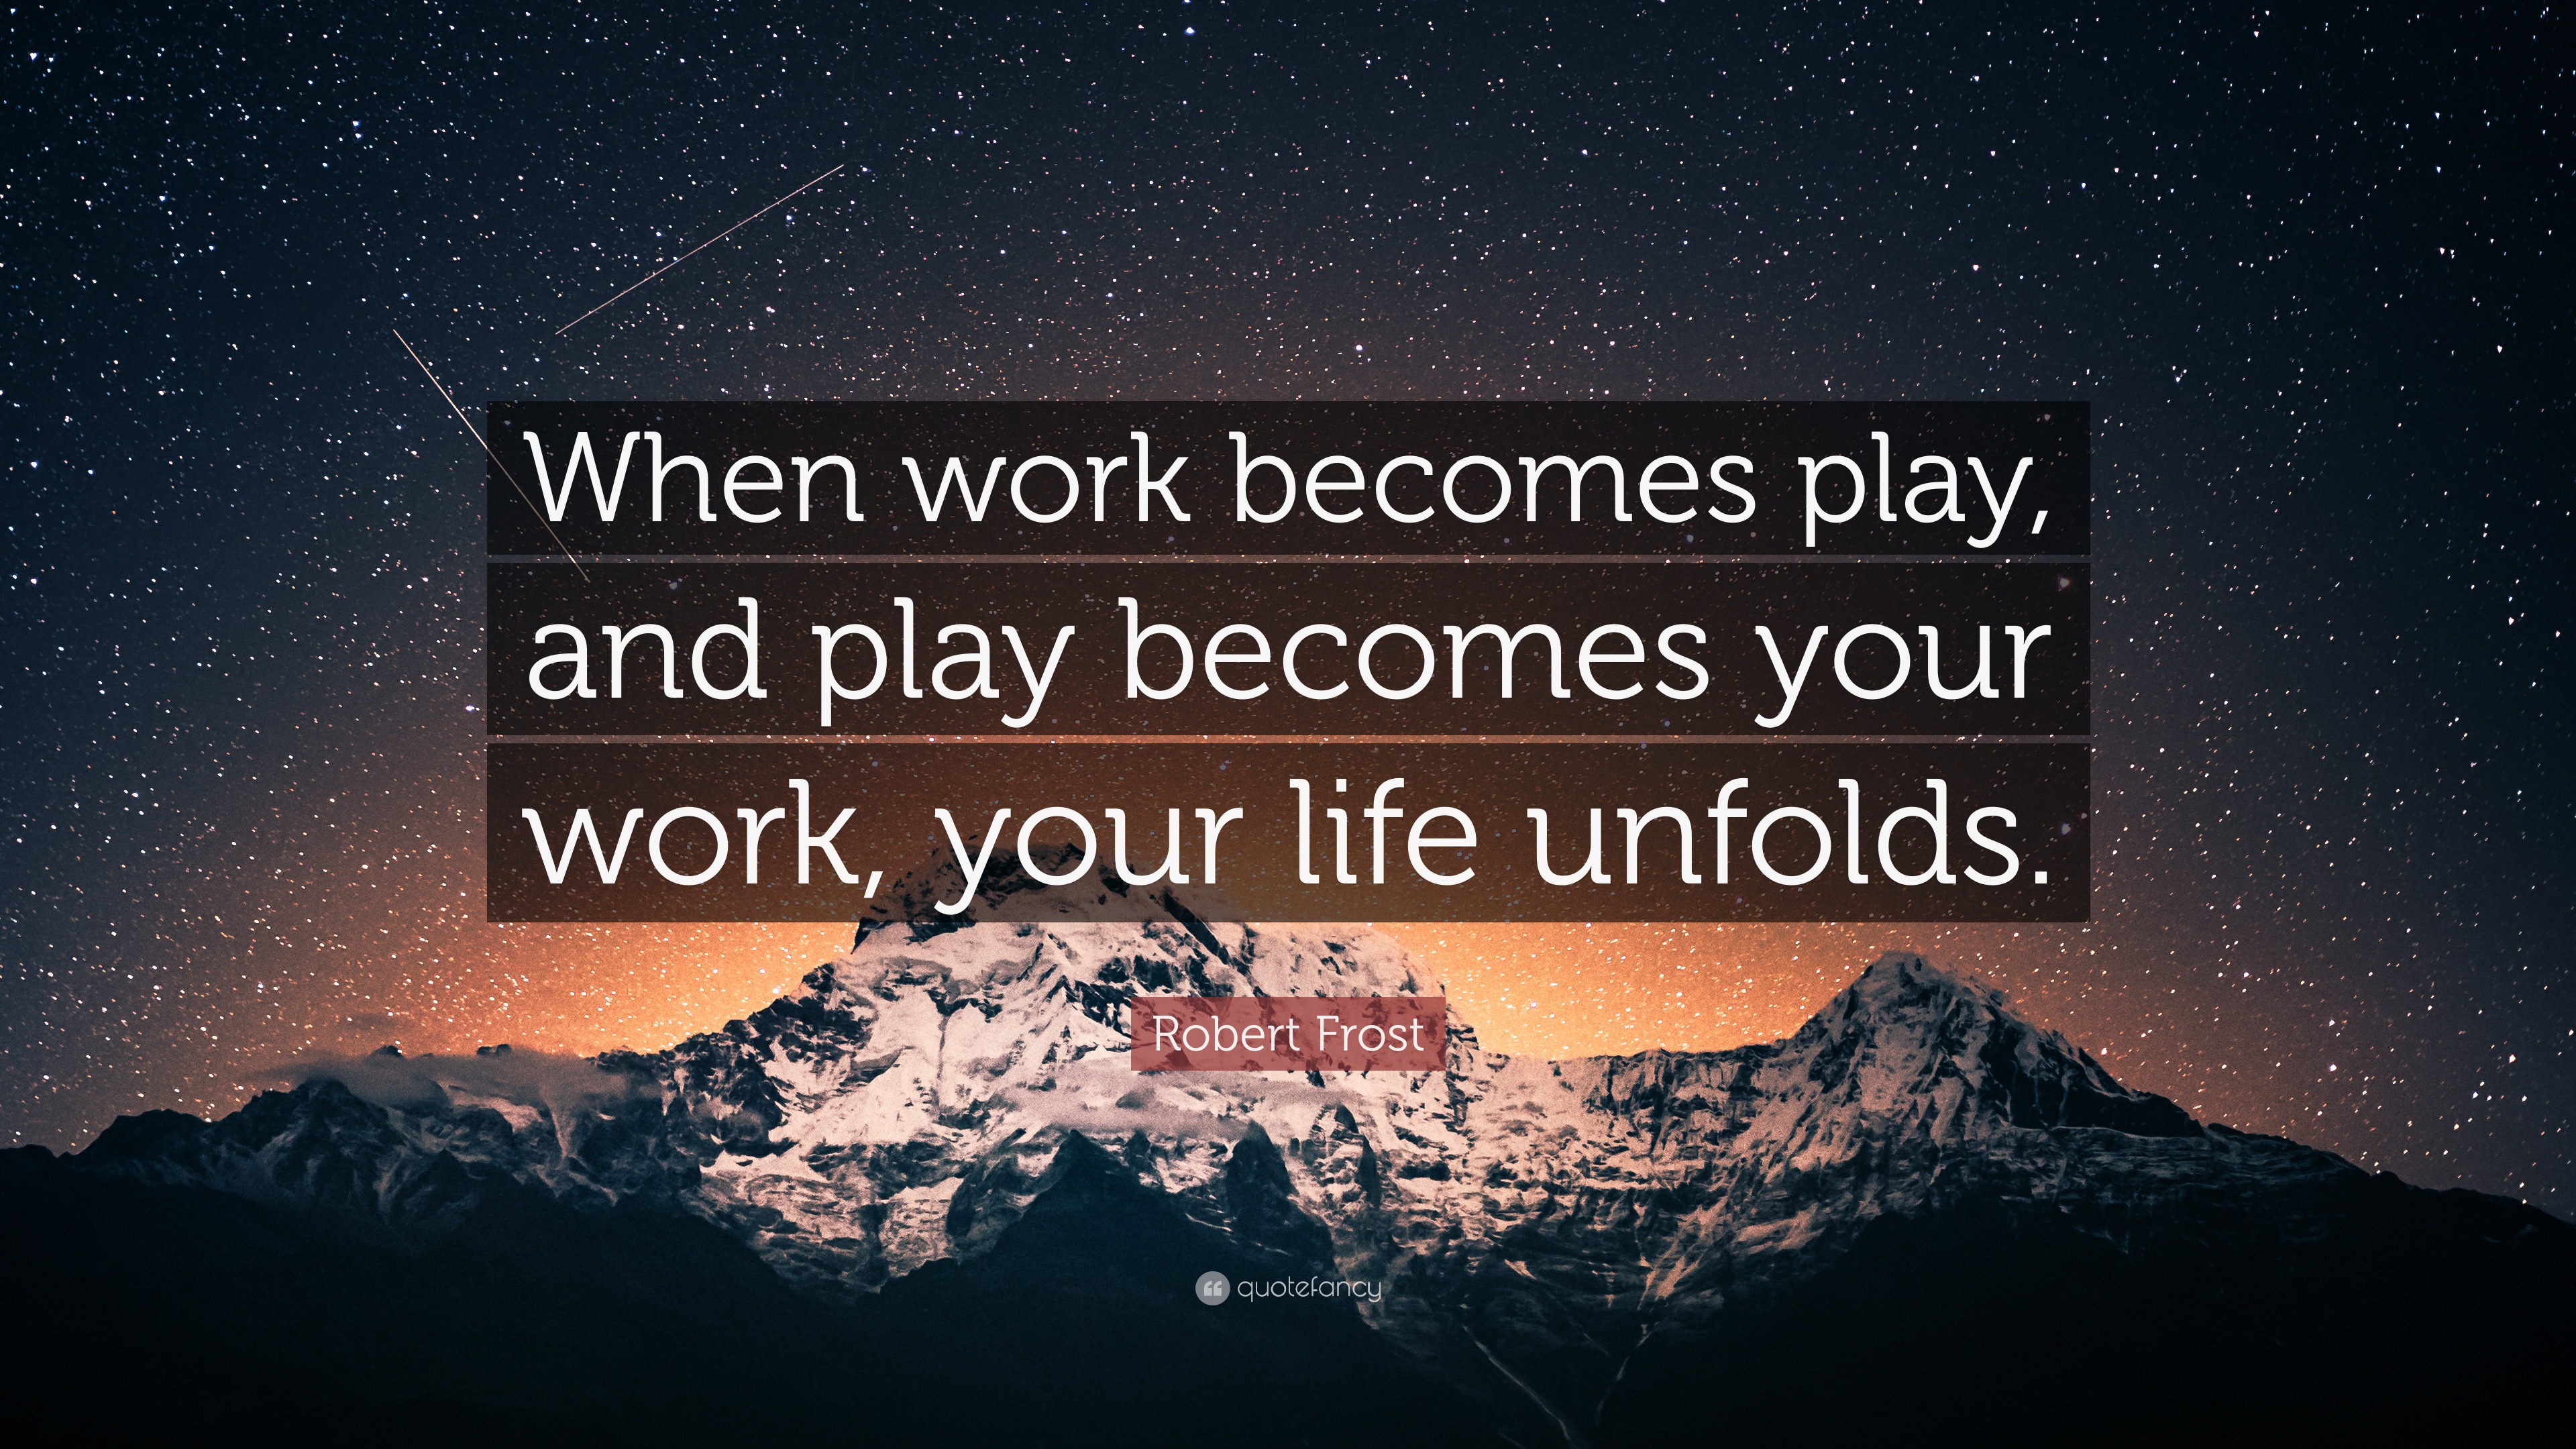 Robert Frost Quote: "When work becomes play, and play becomes your work, your life unfolds." (12 ...